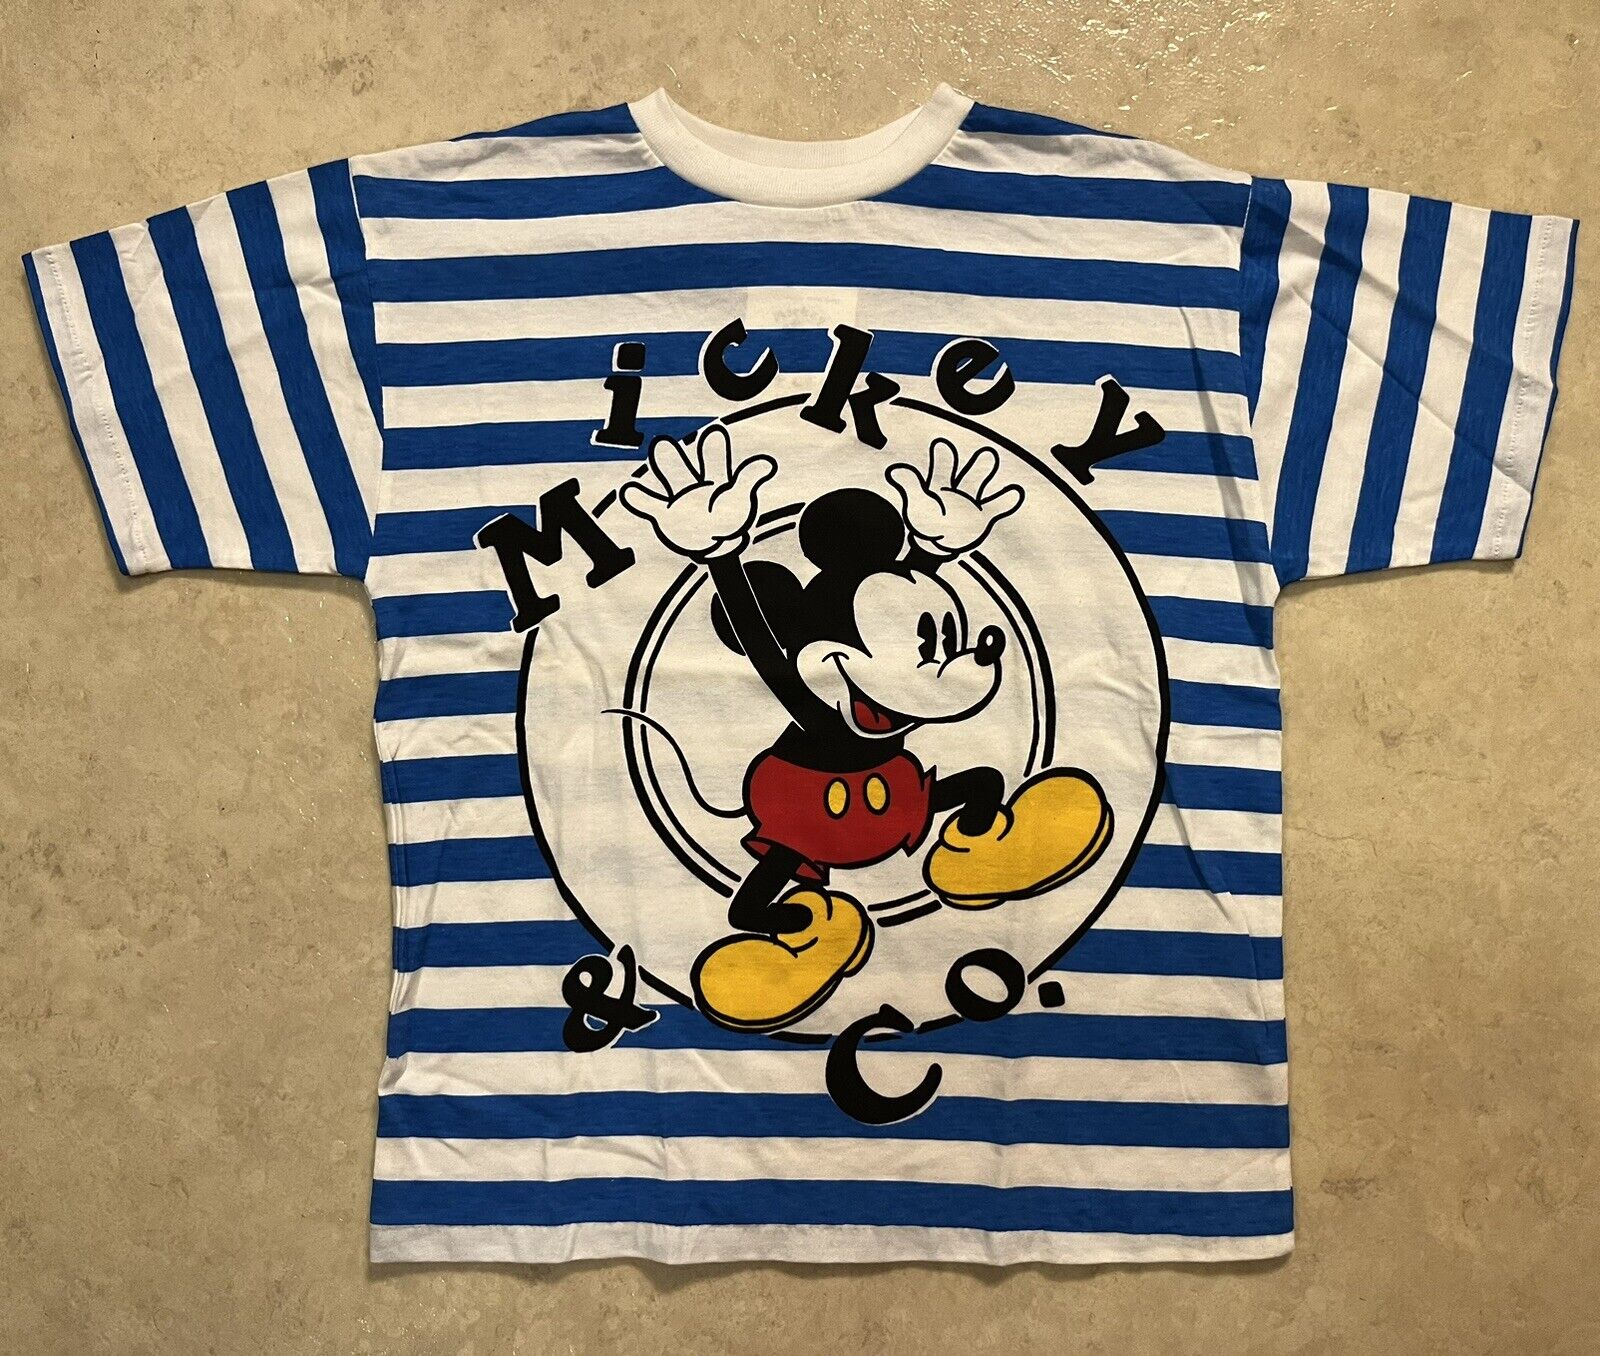 VTG 80s 90s Disney Mickey And Co Striped T-Shirt Sz 7/8 Mickey Mouse Shirt ✅ NWT